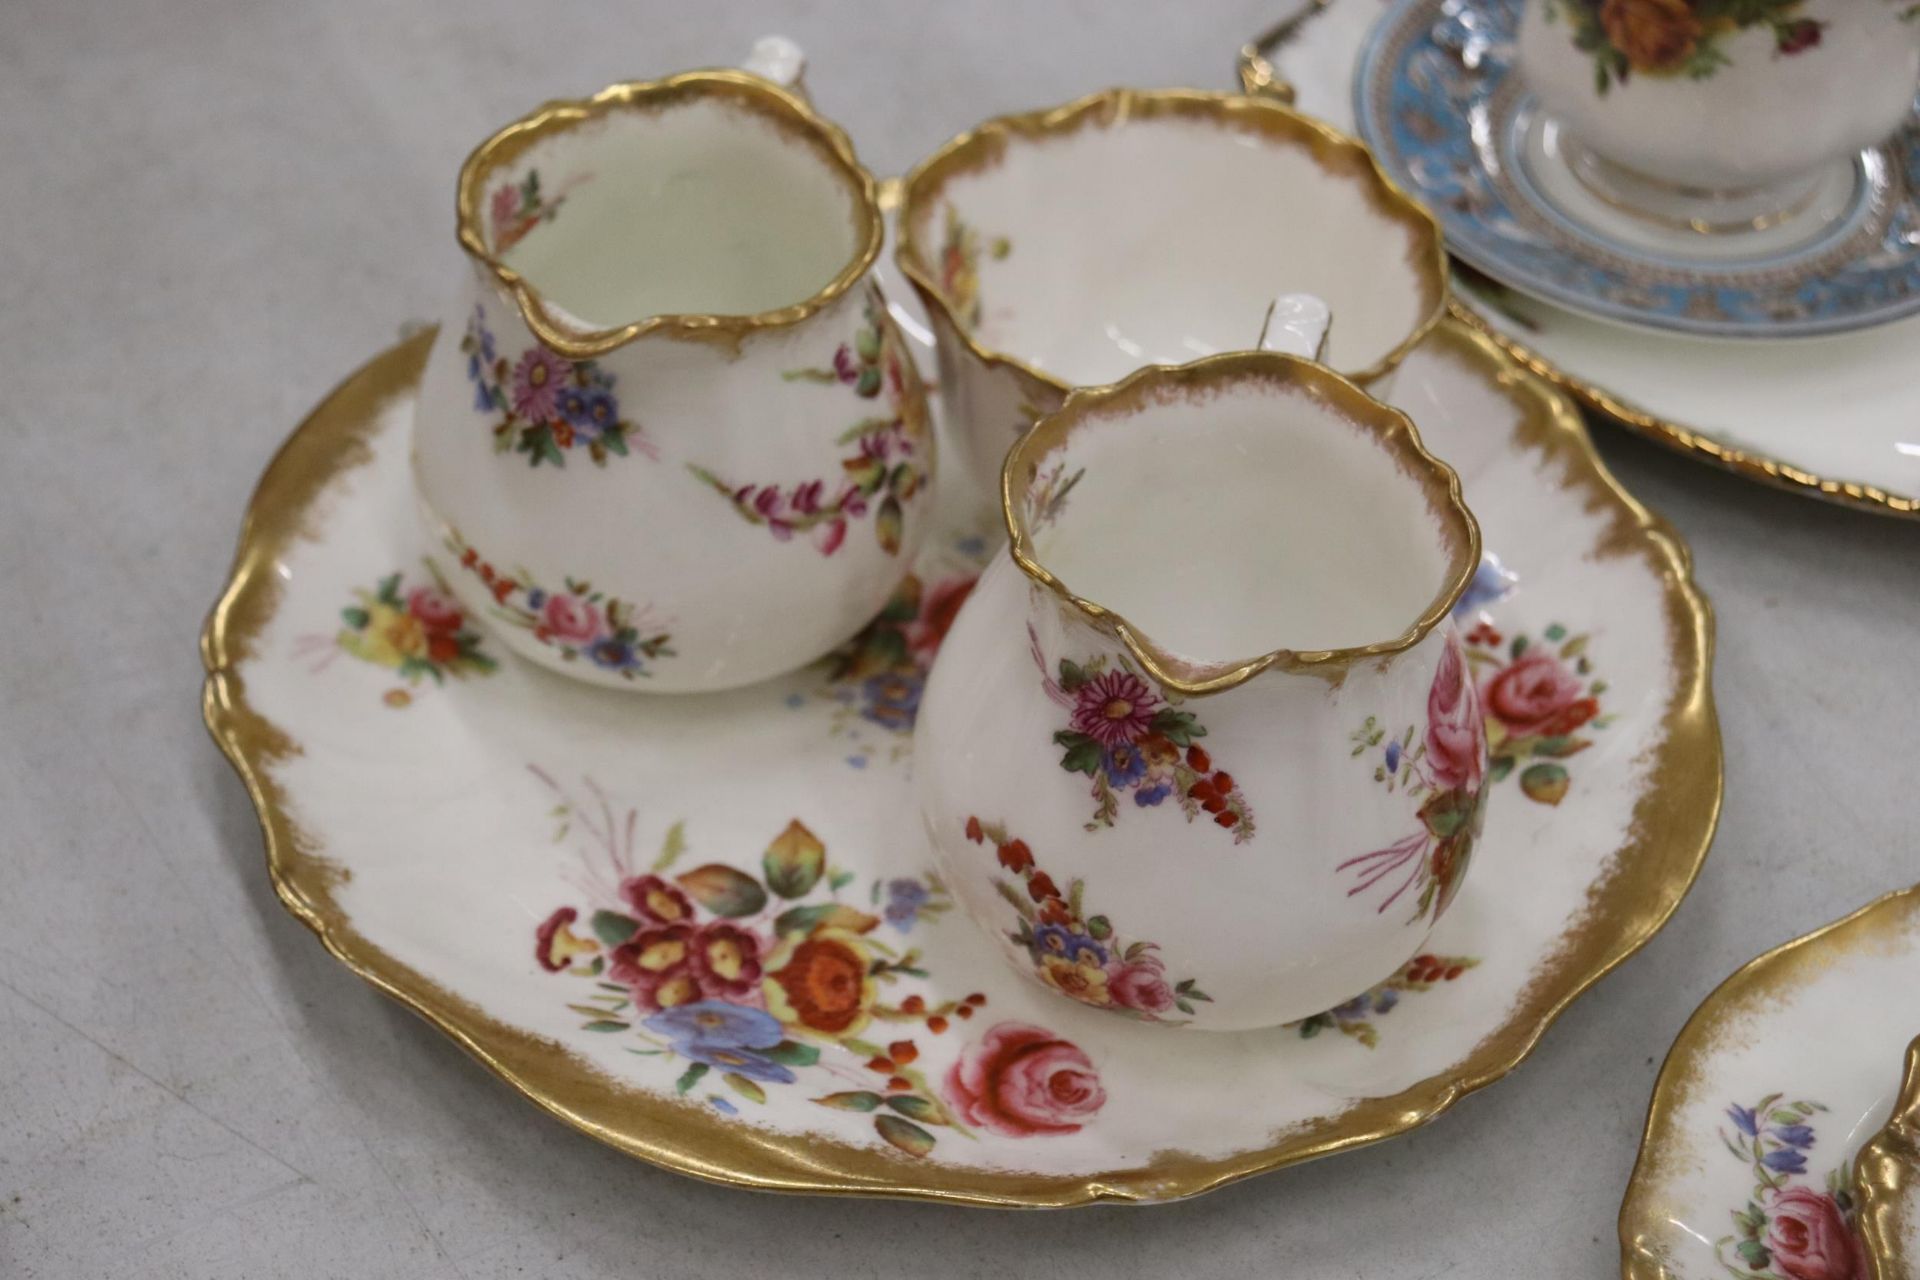 A 15 PIECE PART TEASET HAMMERSLEY AND CO TOGETHER WITH AN OLD ROYAL ALBERT COUNTRY ROSES CAKE PLATES - Image 6 of 10